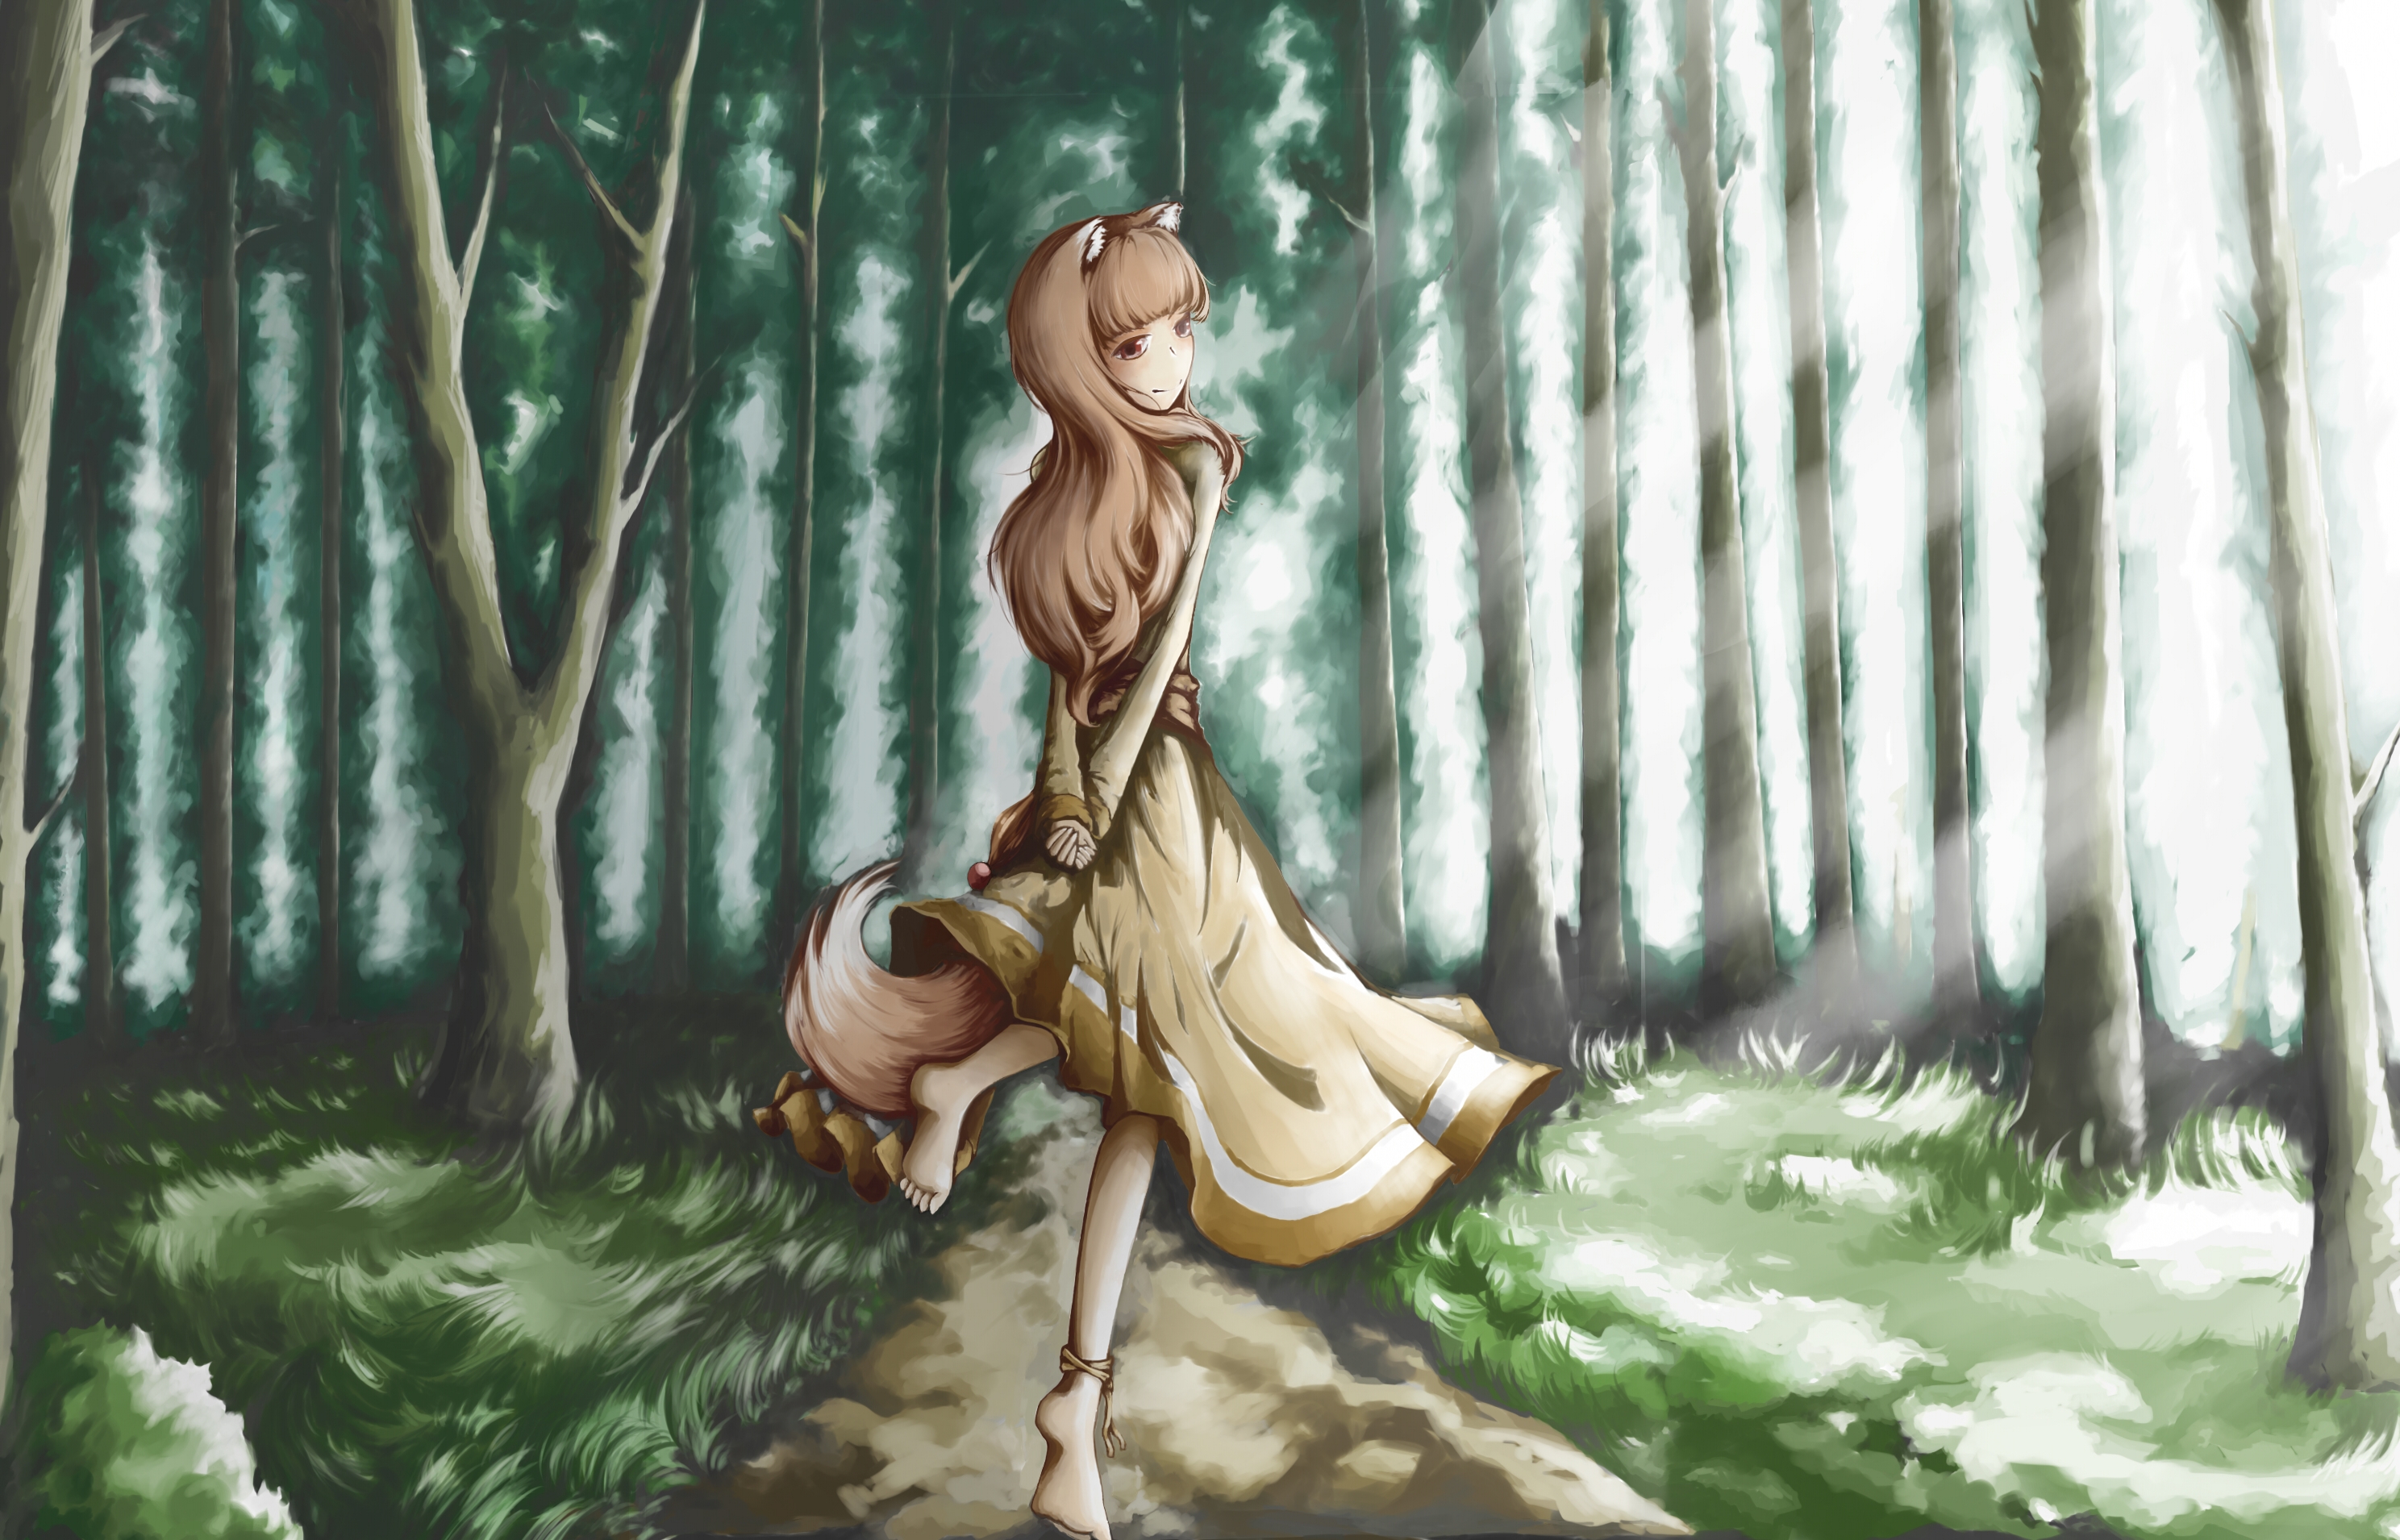 Spice and Wolf: the Wind that spans the Sea